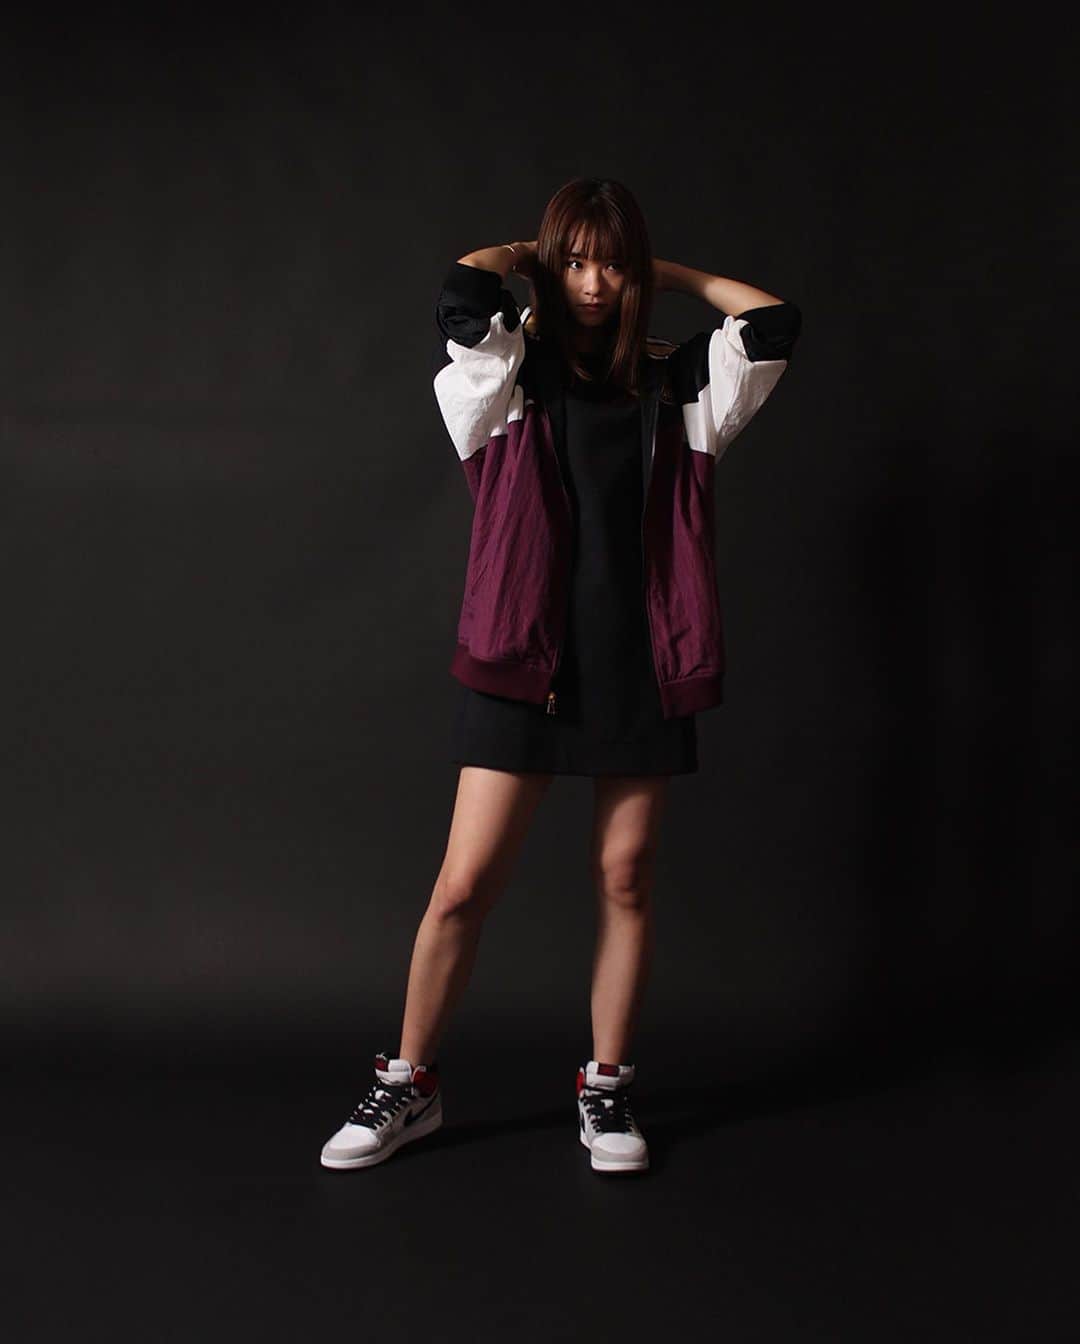 A+Sさんのインスタグラム写真 - (A+SInstagram)「2020 .10 .11 (sun) in store  ■NIKE JORDAN PSG FULLZIP JACKET COLOR : BLACK×BORDEAUX SIZE : S - 2XL PRICE : ¥17,500 (+TAX)  パリ・サンジェルマンのアンセムジャケットで日常にサッカースタイルを取り入れよう。試合前のアンセムでプロがピッチで着用するものをモデルにしており、軽量の織り生地で作られています。ジャケットは、ジョーダンブランドとのクラブのコラボレーションを象徴する、刺繍とステッチダウンのディテールの配列を備えています。  PARIS X JORDAN UNITED. Soccer style hits the street in the Paris Saint-Germain Anthem Jacket. Modeled after what the pros wear on the pitch during pre-game anthems, it's made with lightweight woven fabric. The jacket features an array of embroidered and stitched-down details to showcase the club's collaboration with Jordan brand.  ■NIKE JORDAN PSG ANTHEM PANT COLOR : BLACK×BORDEAUX SIZE : S - 2XL PRICE : ¥14,000 (+TAX)  サッカーをイメージしたストリートウェア。パリ サンジェルマン アンセム パンツは、試合前にピッチで着用するスタイルをイメージ。ハリがあって軽量のメタリックナイロンにメッシュとタフタの裏地を施し、脚部分にはジッパーをあしらいました。  Inspired by what players wear onto the pitch before the match, the Paris SaintGermain Anthem Pants are made from crisp, light metallic fabric. They use a mesh and taffeta lining and zippered leg openings. Colors and graphics highlight the collaboration with the French soccer club.  #a_and_s #NIKE #PSG #JORDAN #JUMPMAN #JUMPMAN23 #NIKEJORDAN #JORDANBRAND #JORDANBRANDPSG #CICESTPARIS #PANAME」10月7日 11時48分 - a_and_s_official